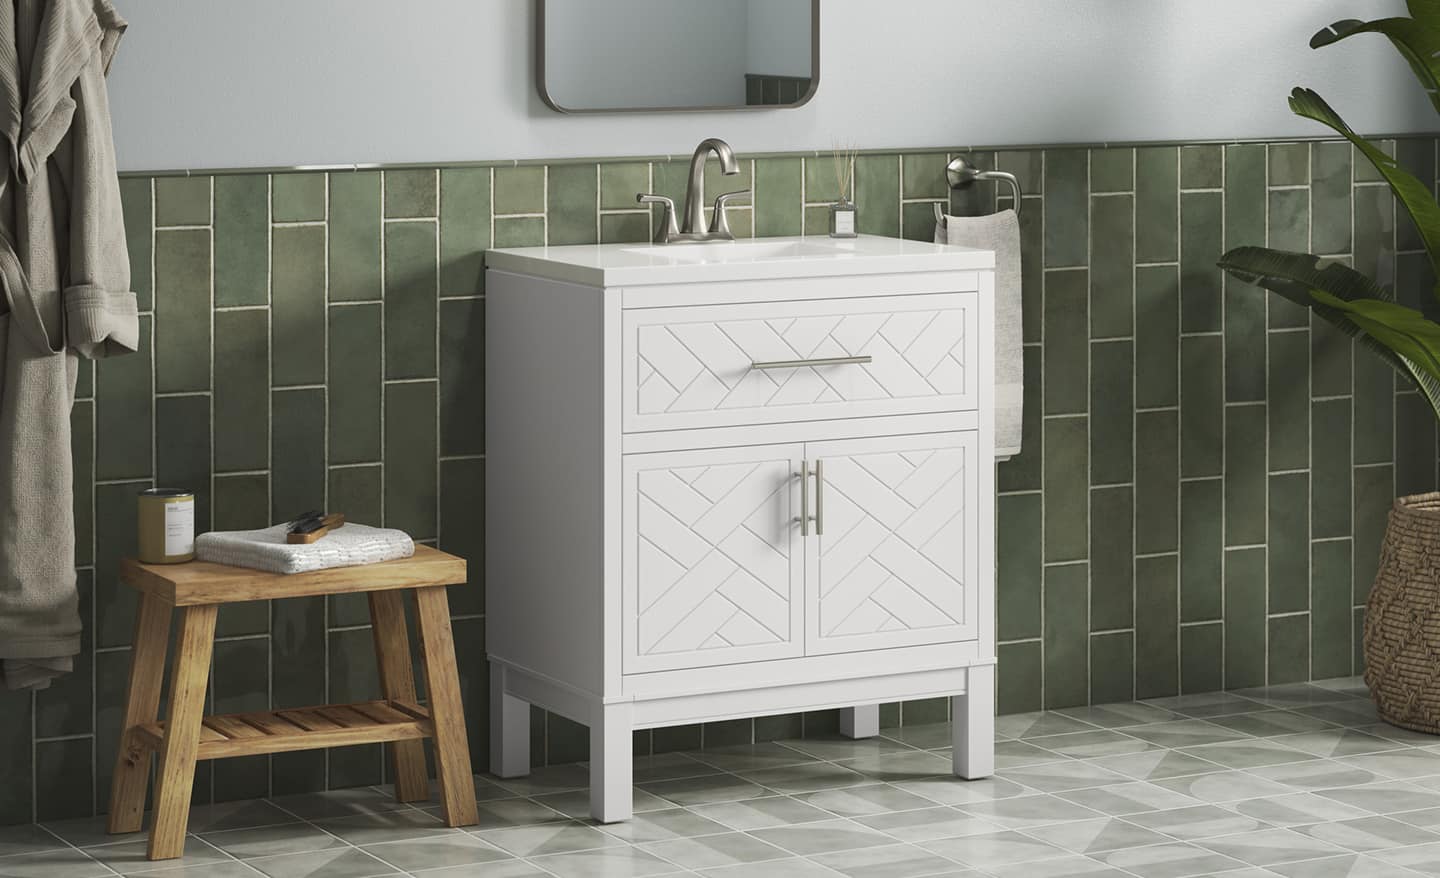 A single vanity in white in a bathroom